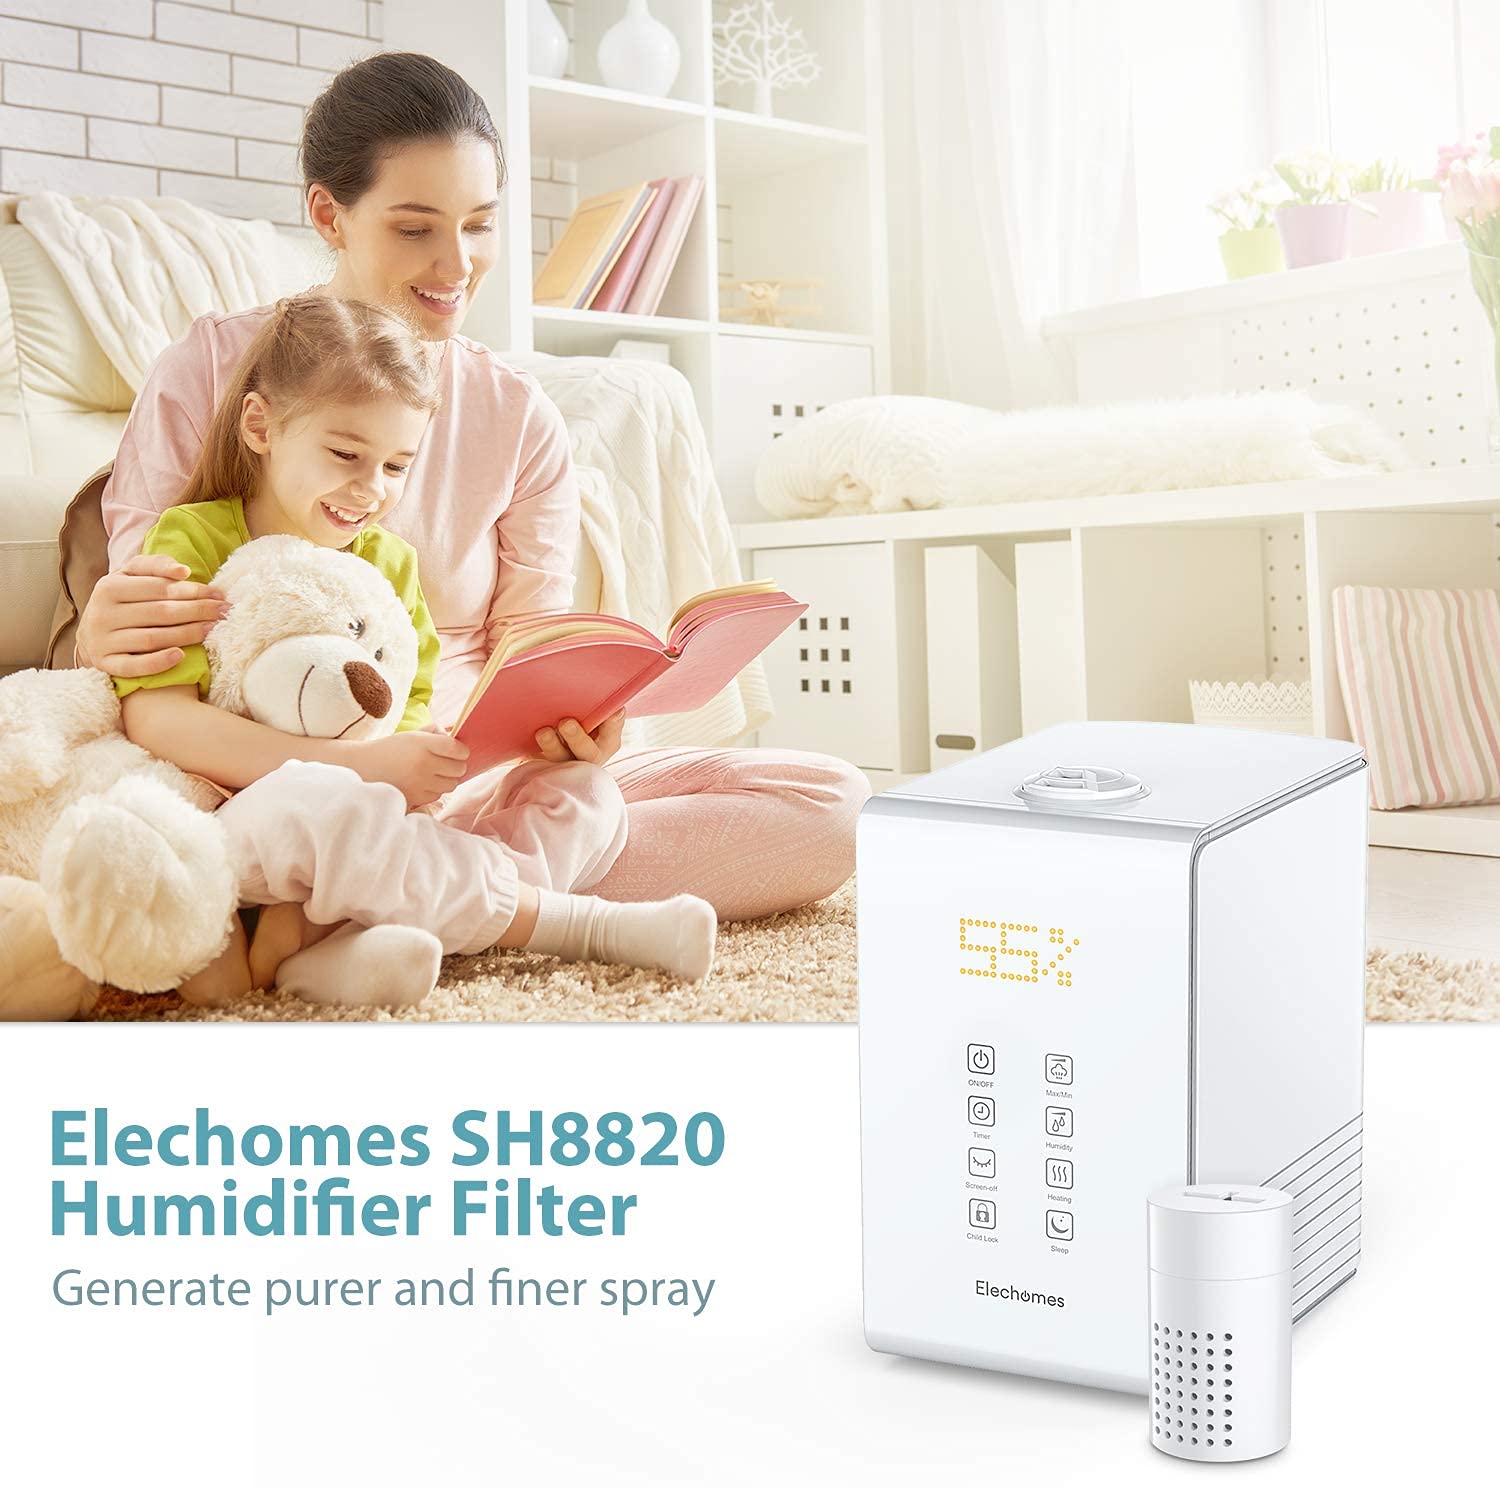 Elechomes Humidifier Filter for SH8820 Humidifiers, Works for Other Brands As Well